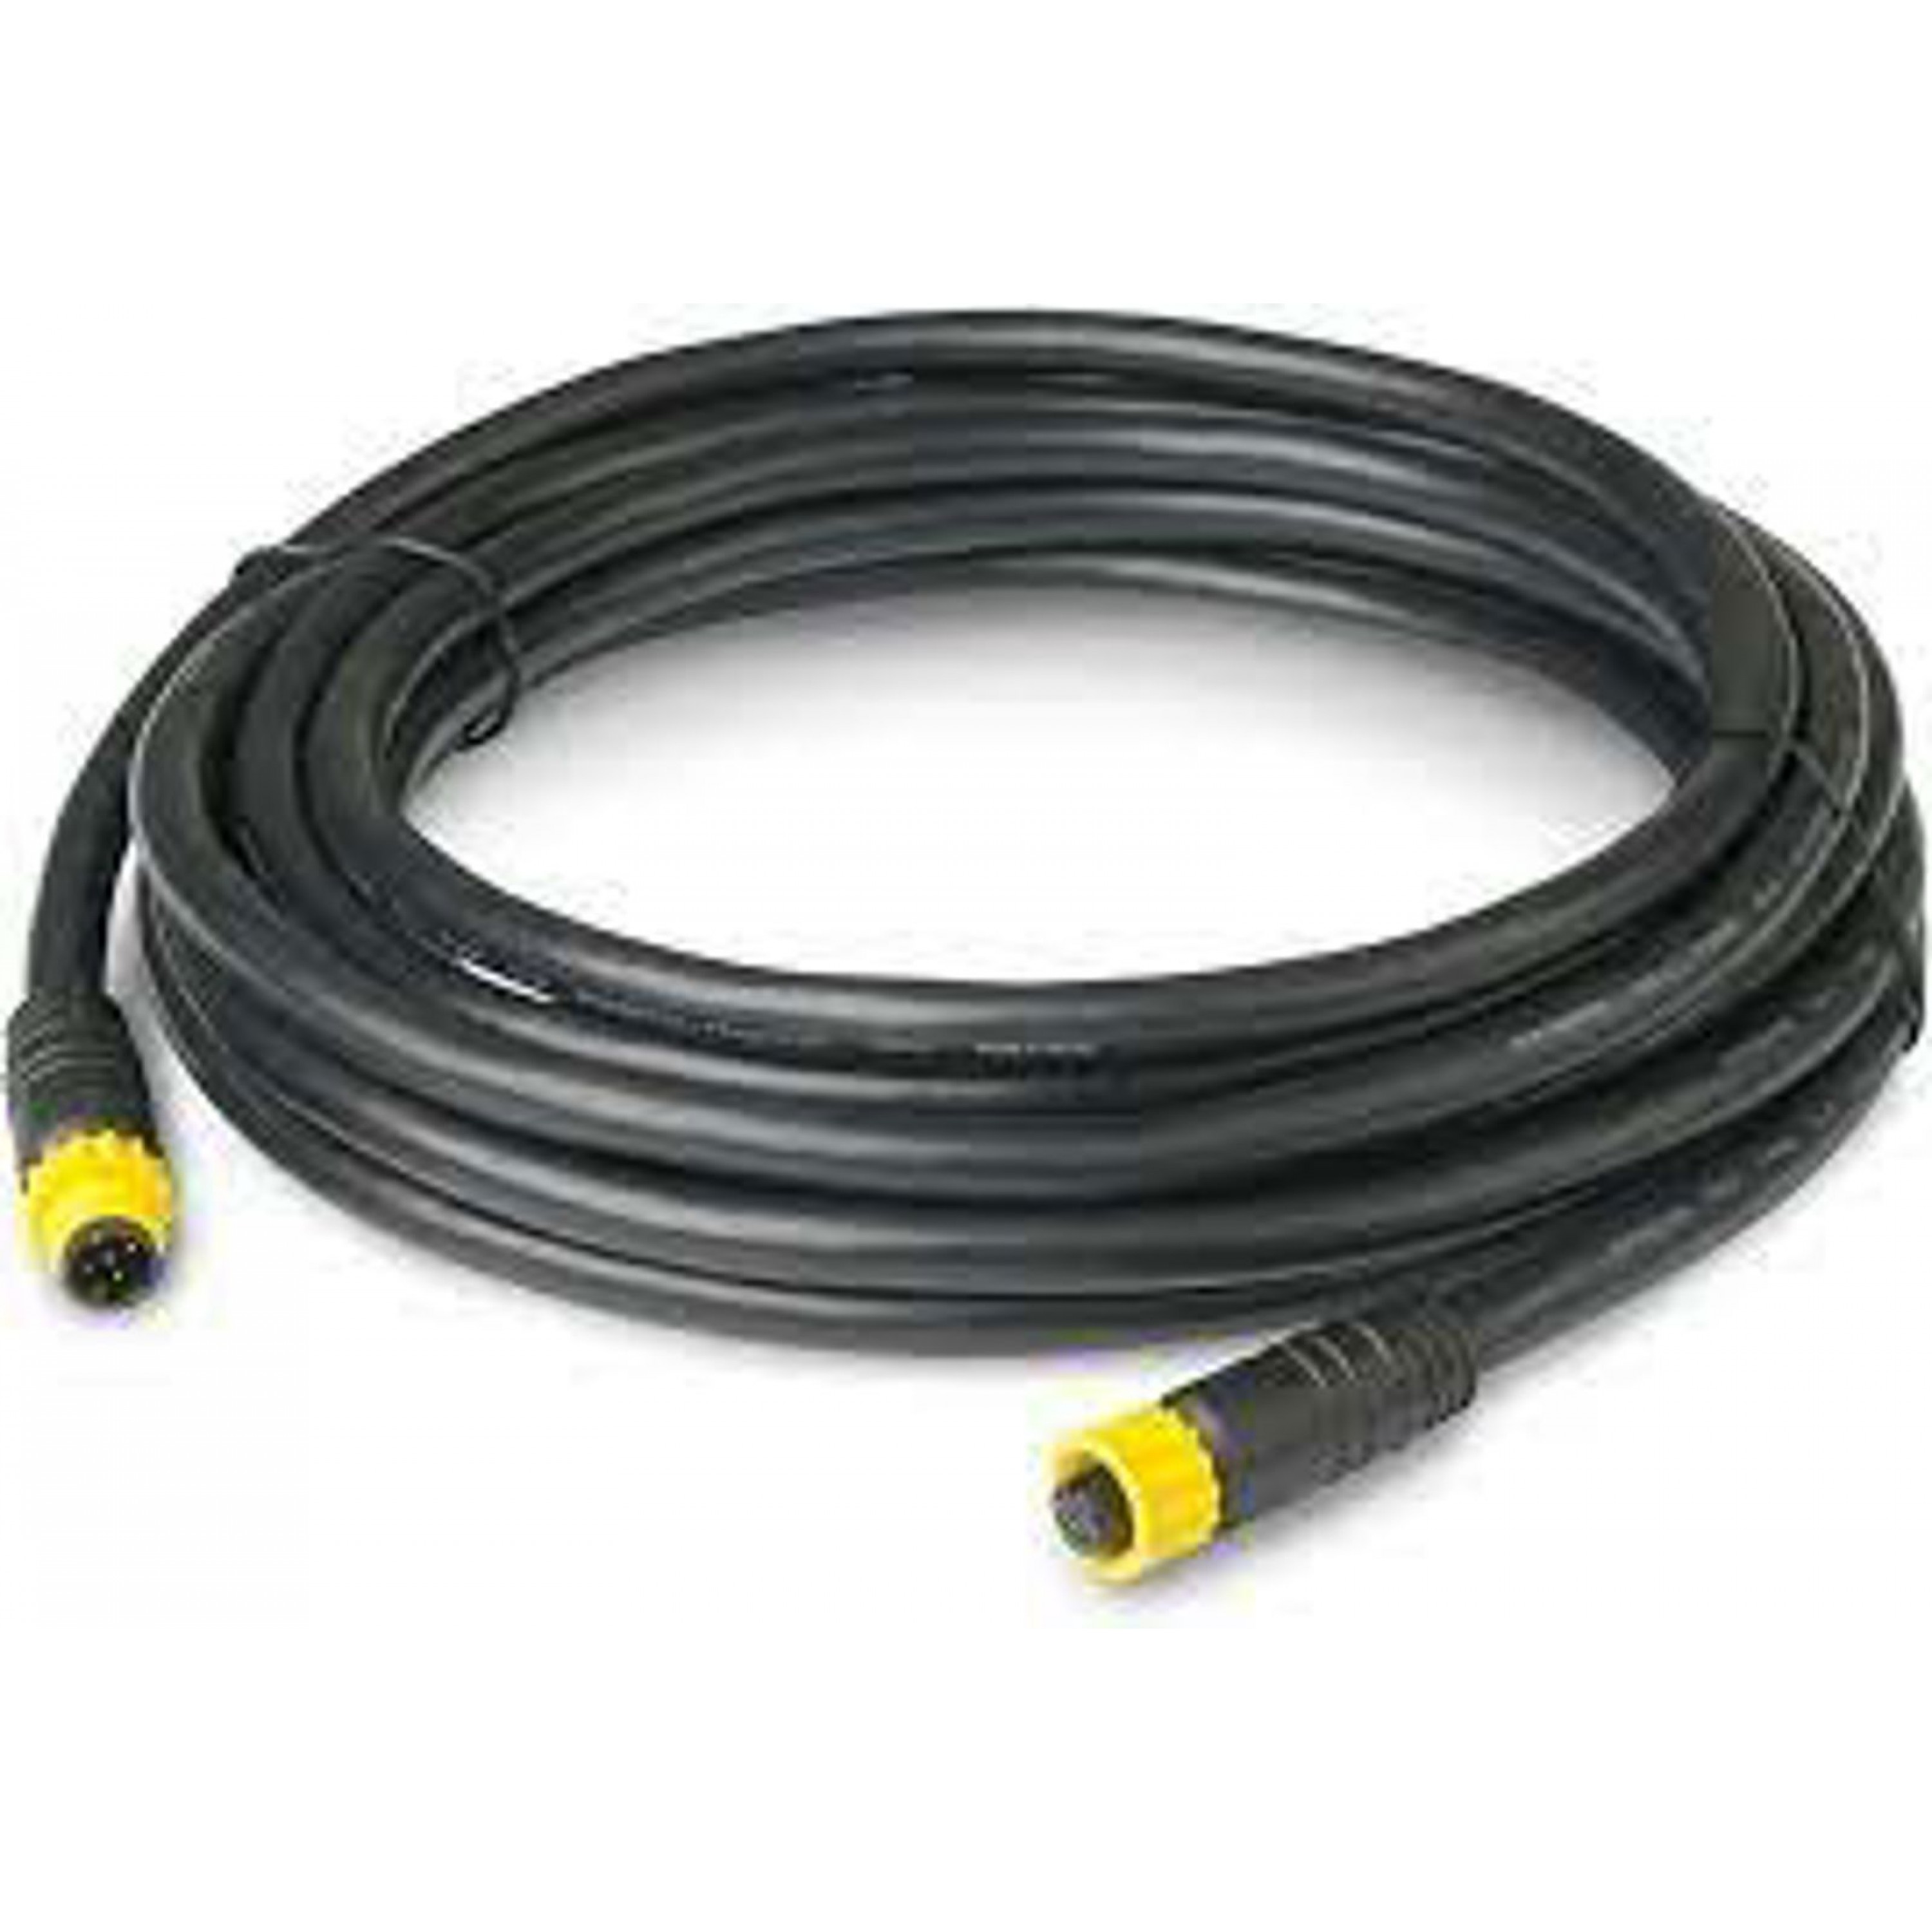 ANCOR BACK BONE CABLE 5 METER 16 FT